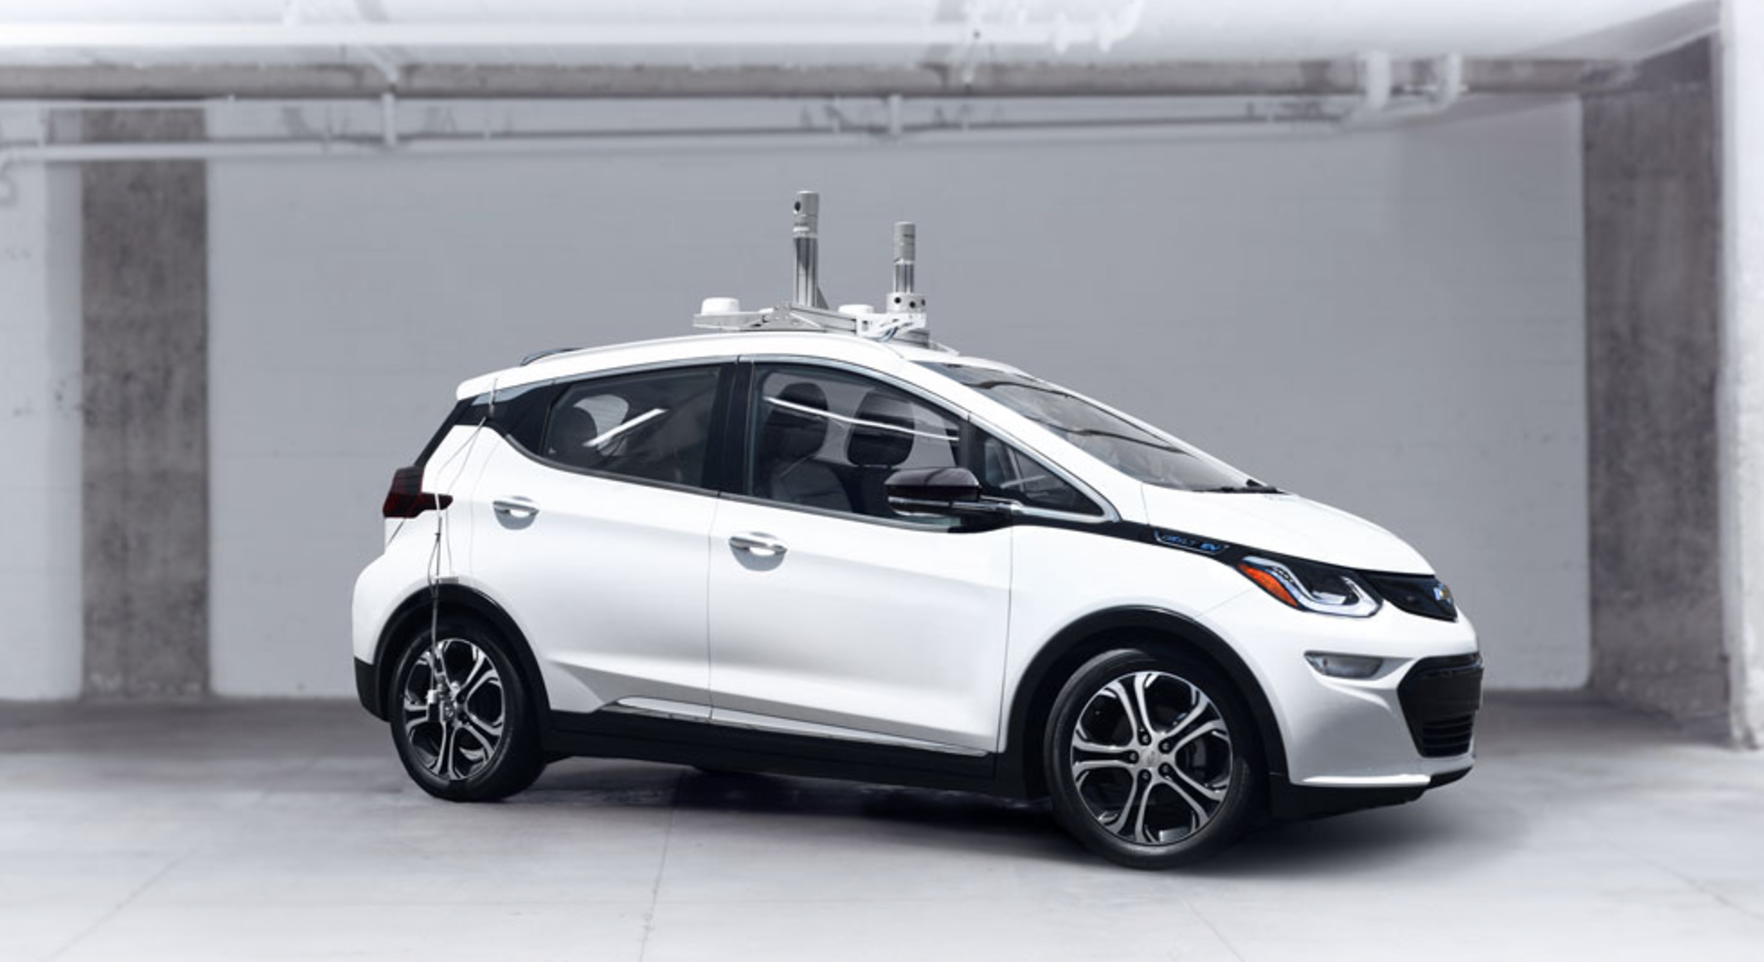 GM and Cruise Pair up to Make the Bolt Autonomous